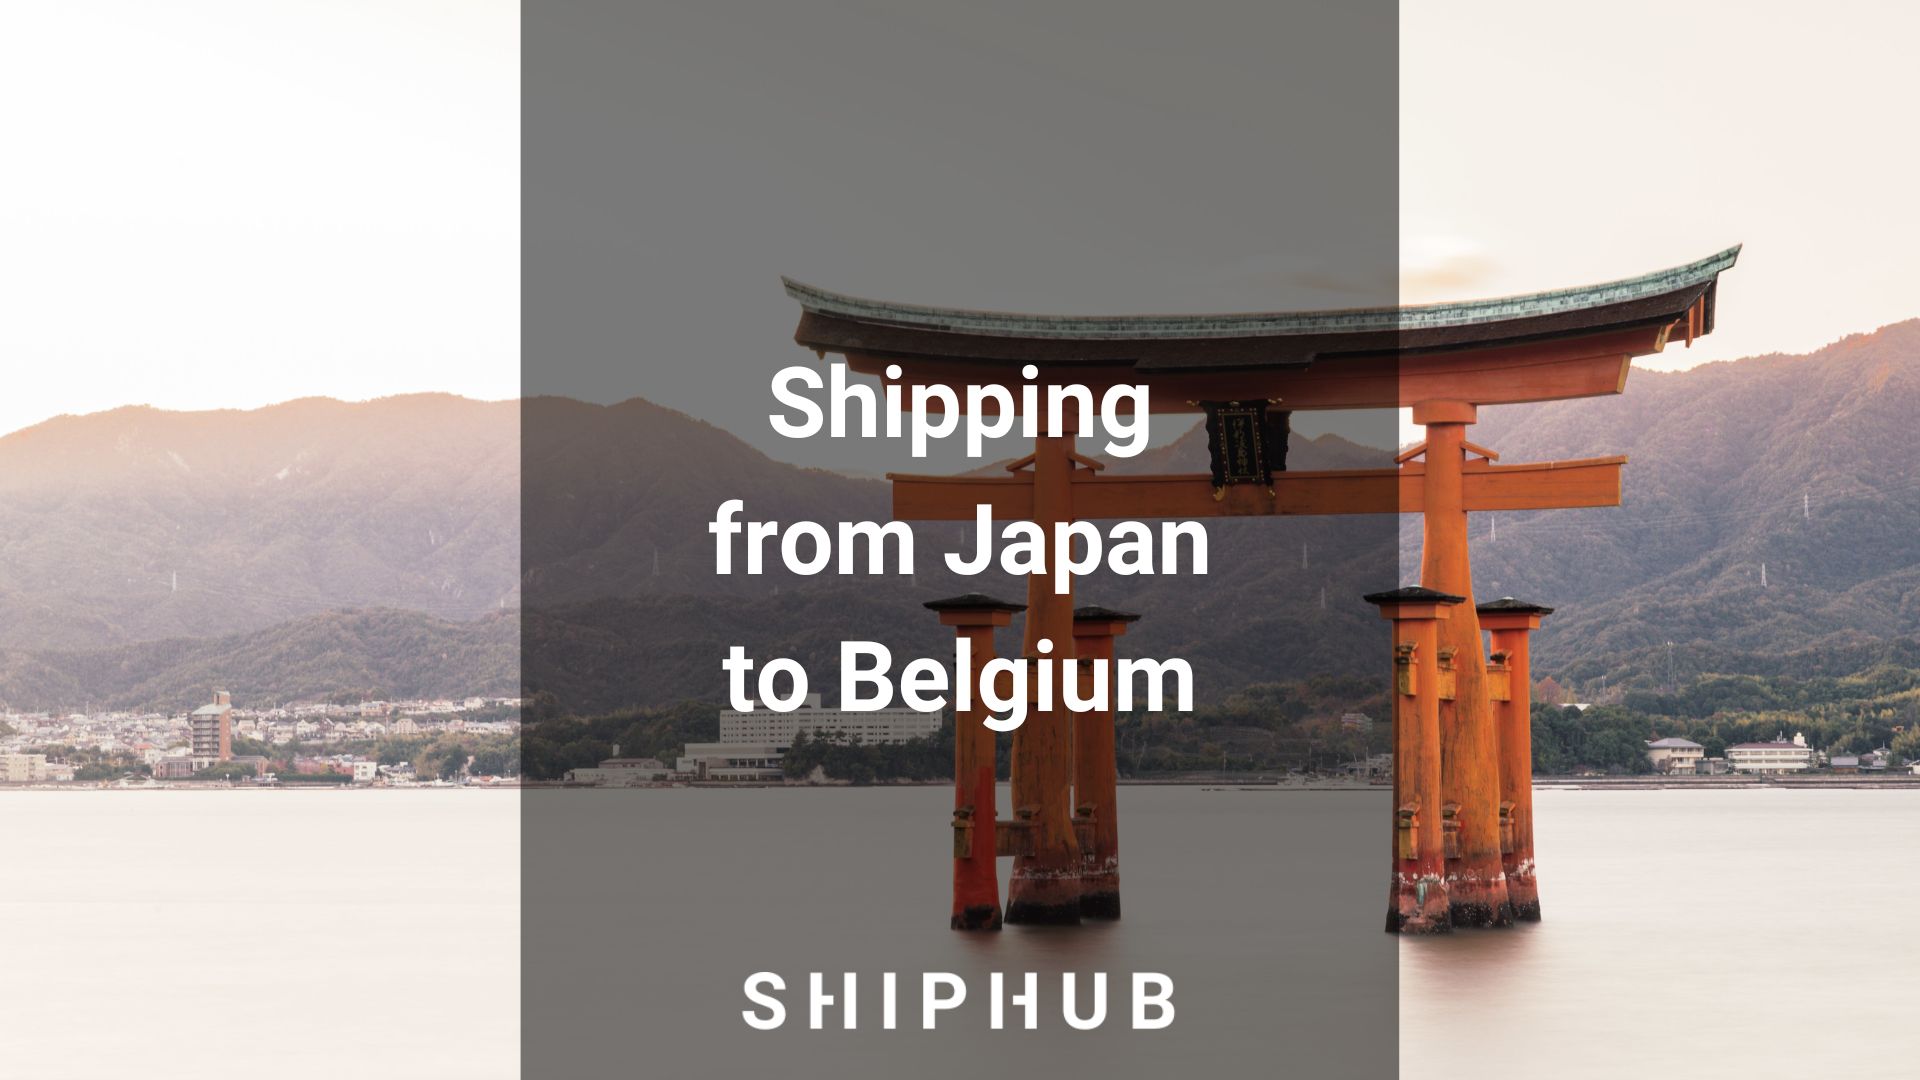 Shipping from Japan to Belgium